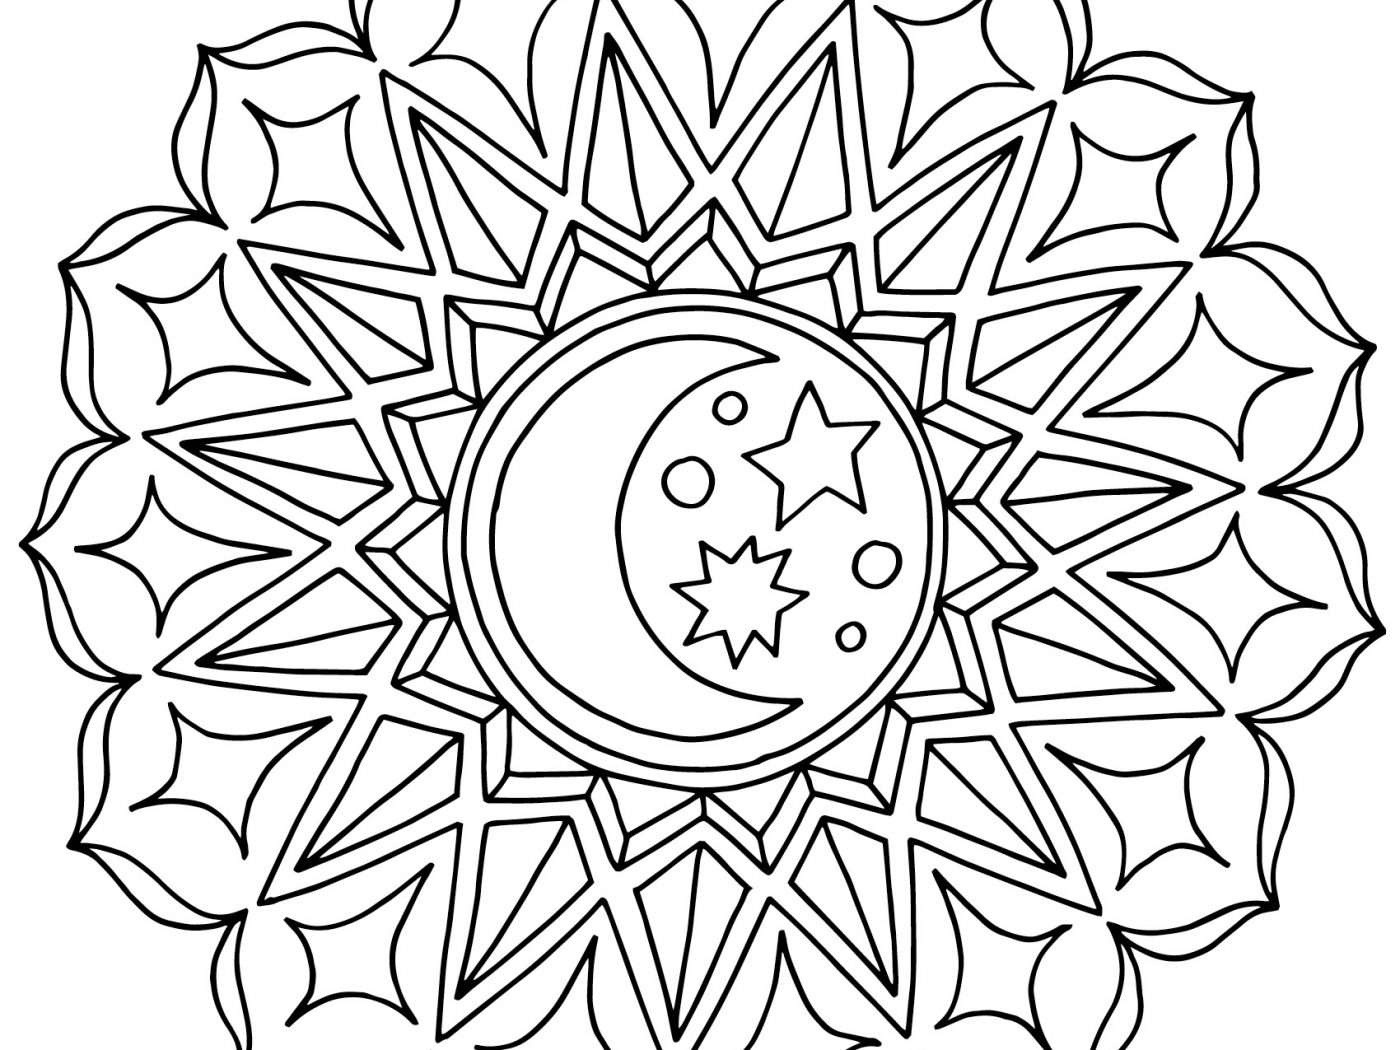 printable-islamic-coloring-pages-for-kids-sketch-coloring-page